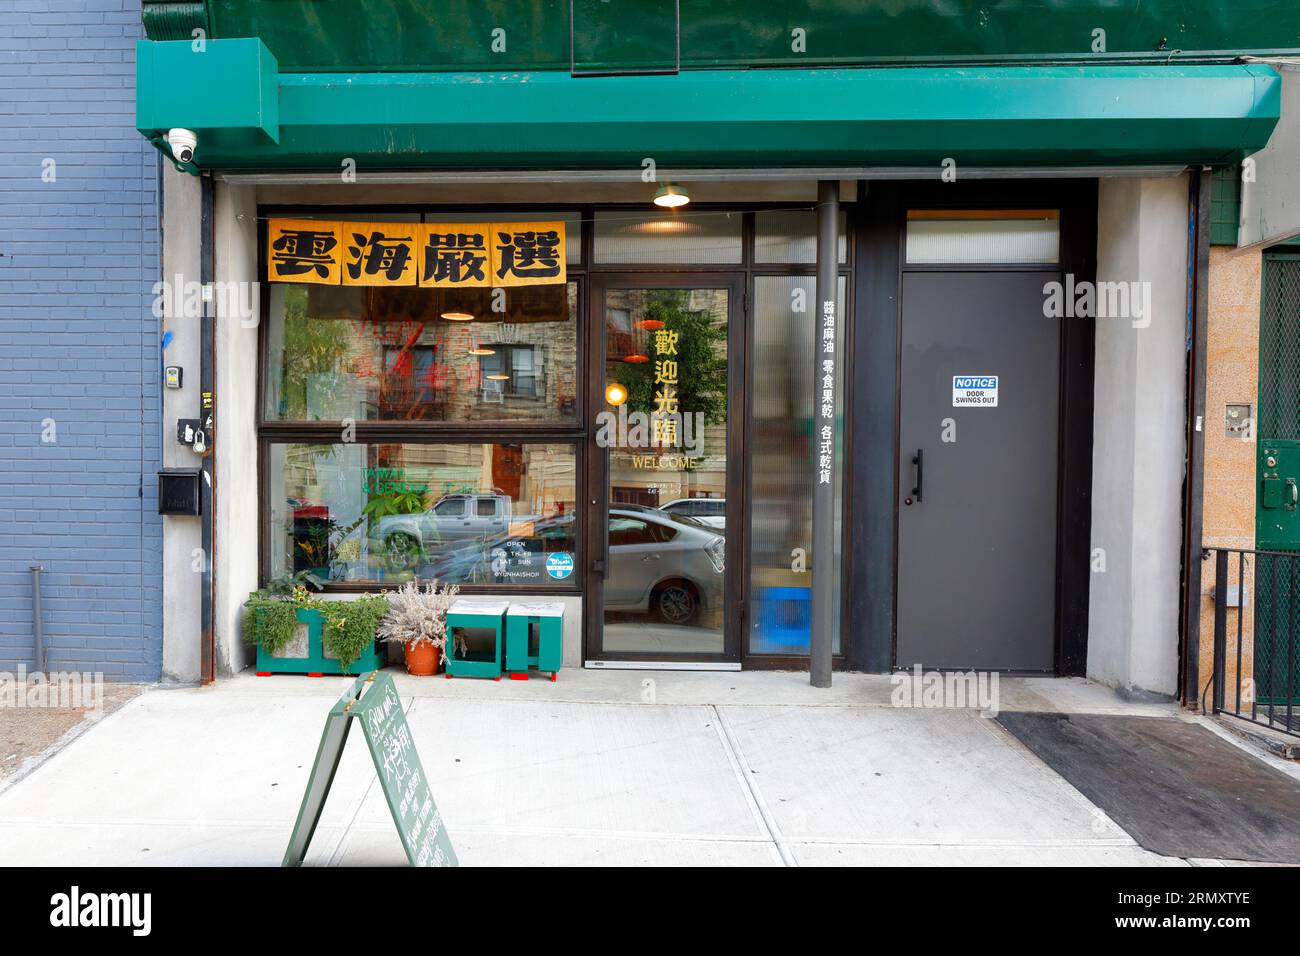 Yun Hai Shop 雲海, 170 Montrose Ave, Brooklyn, New York. NYC storefront photo of a Taiwanese Chinese grocery store in Williamsburg. Stock Photo